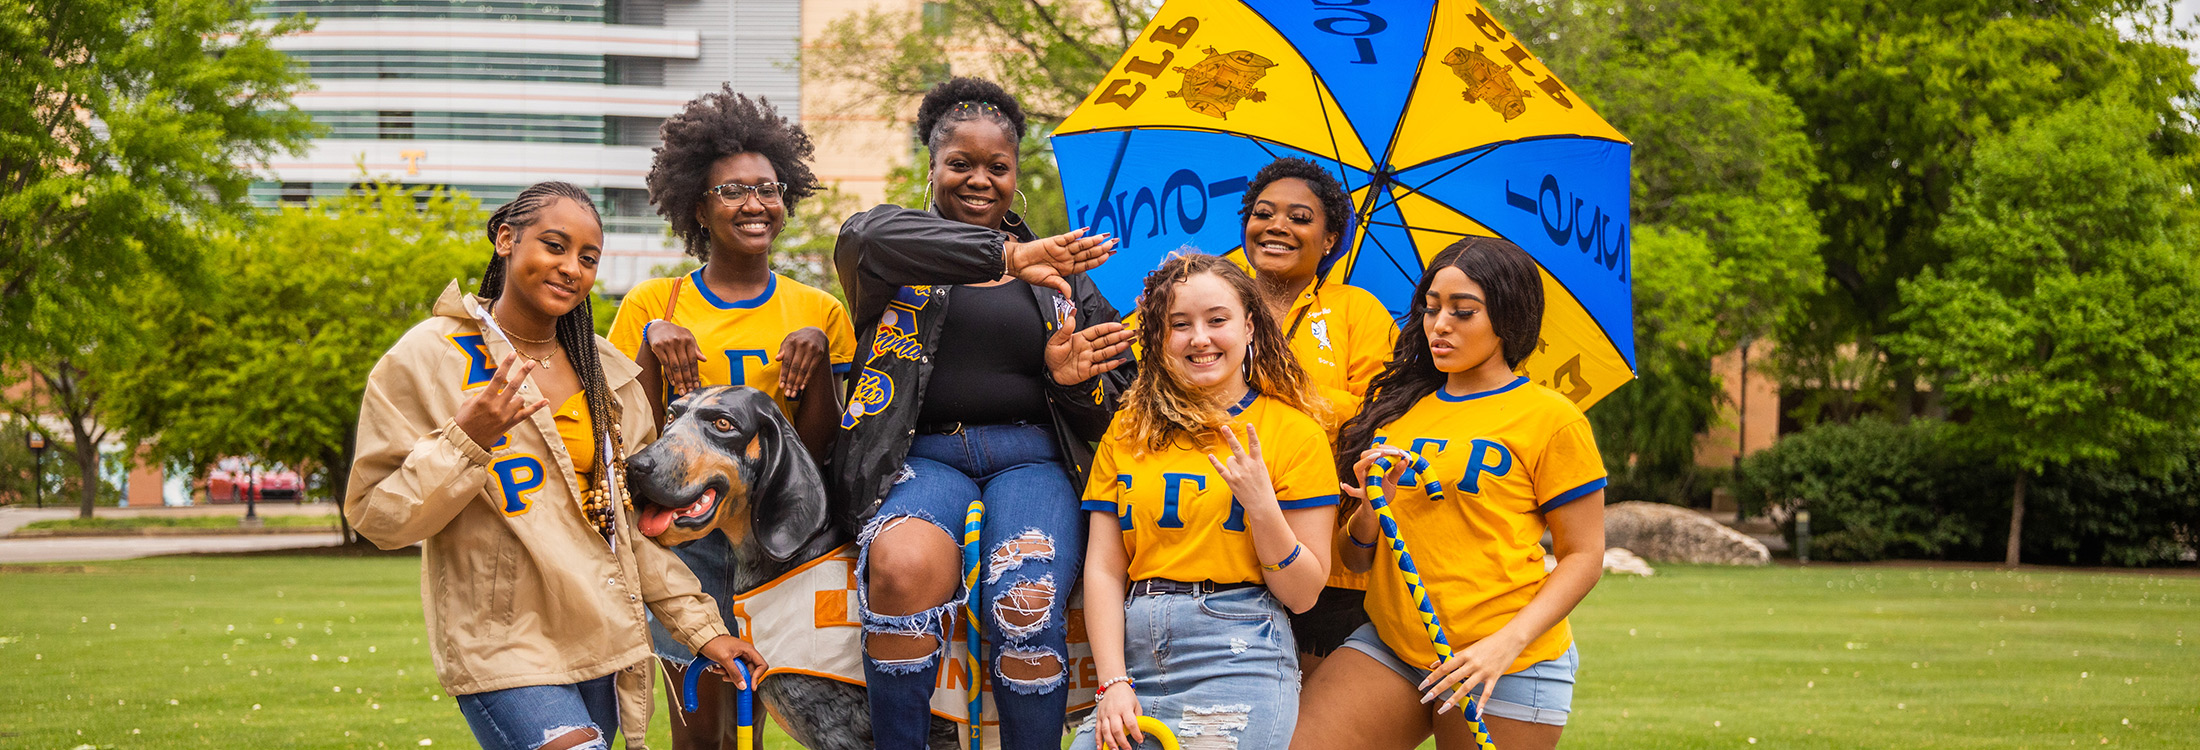 Members of Sigma Gamma Rho sorority pose in Circle Park with a Smokey mascot statue.